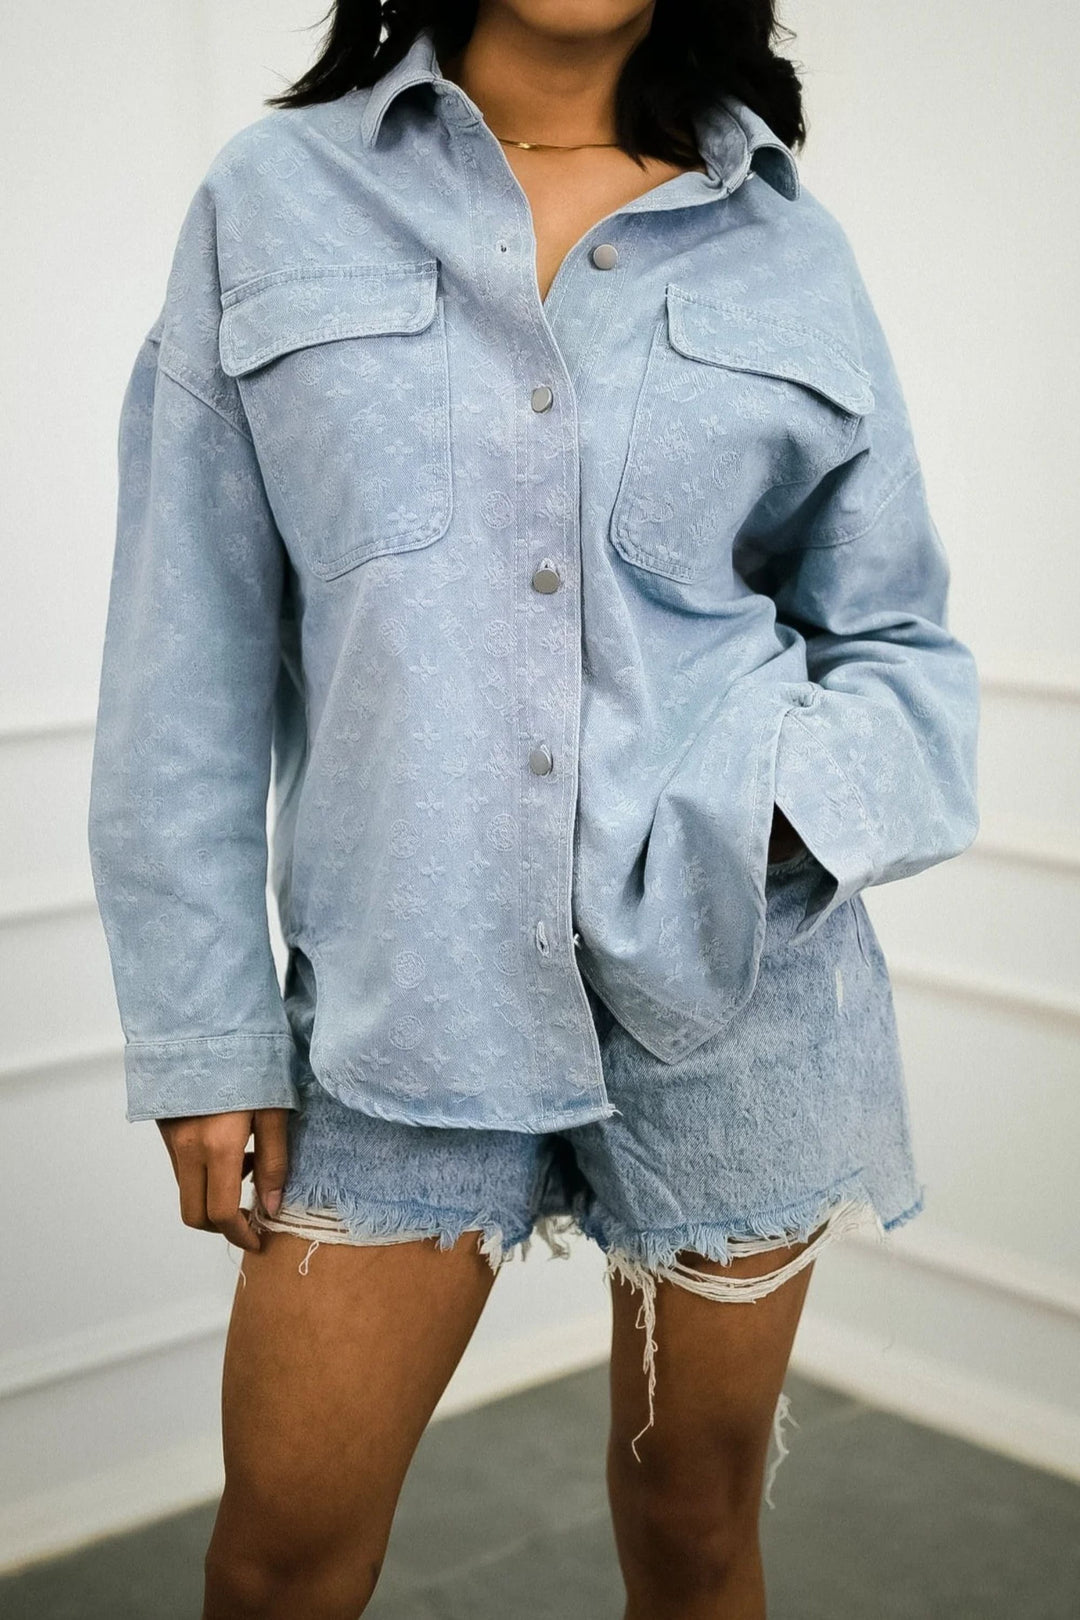 Convertible collar denim shirt for laid-back style